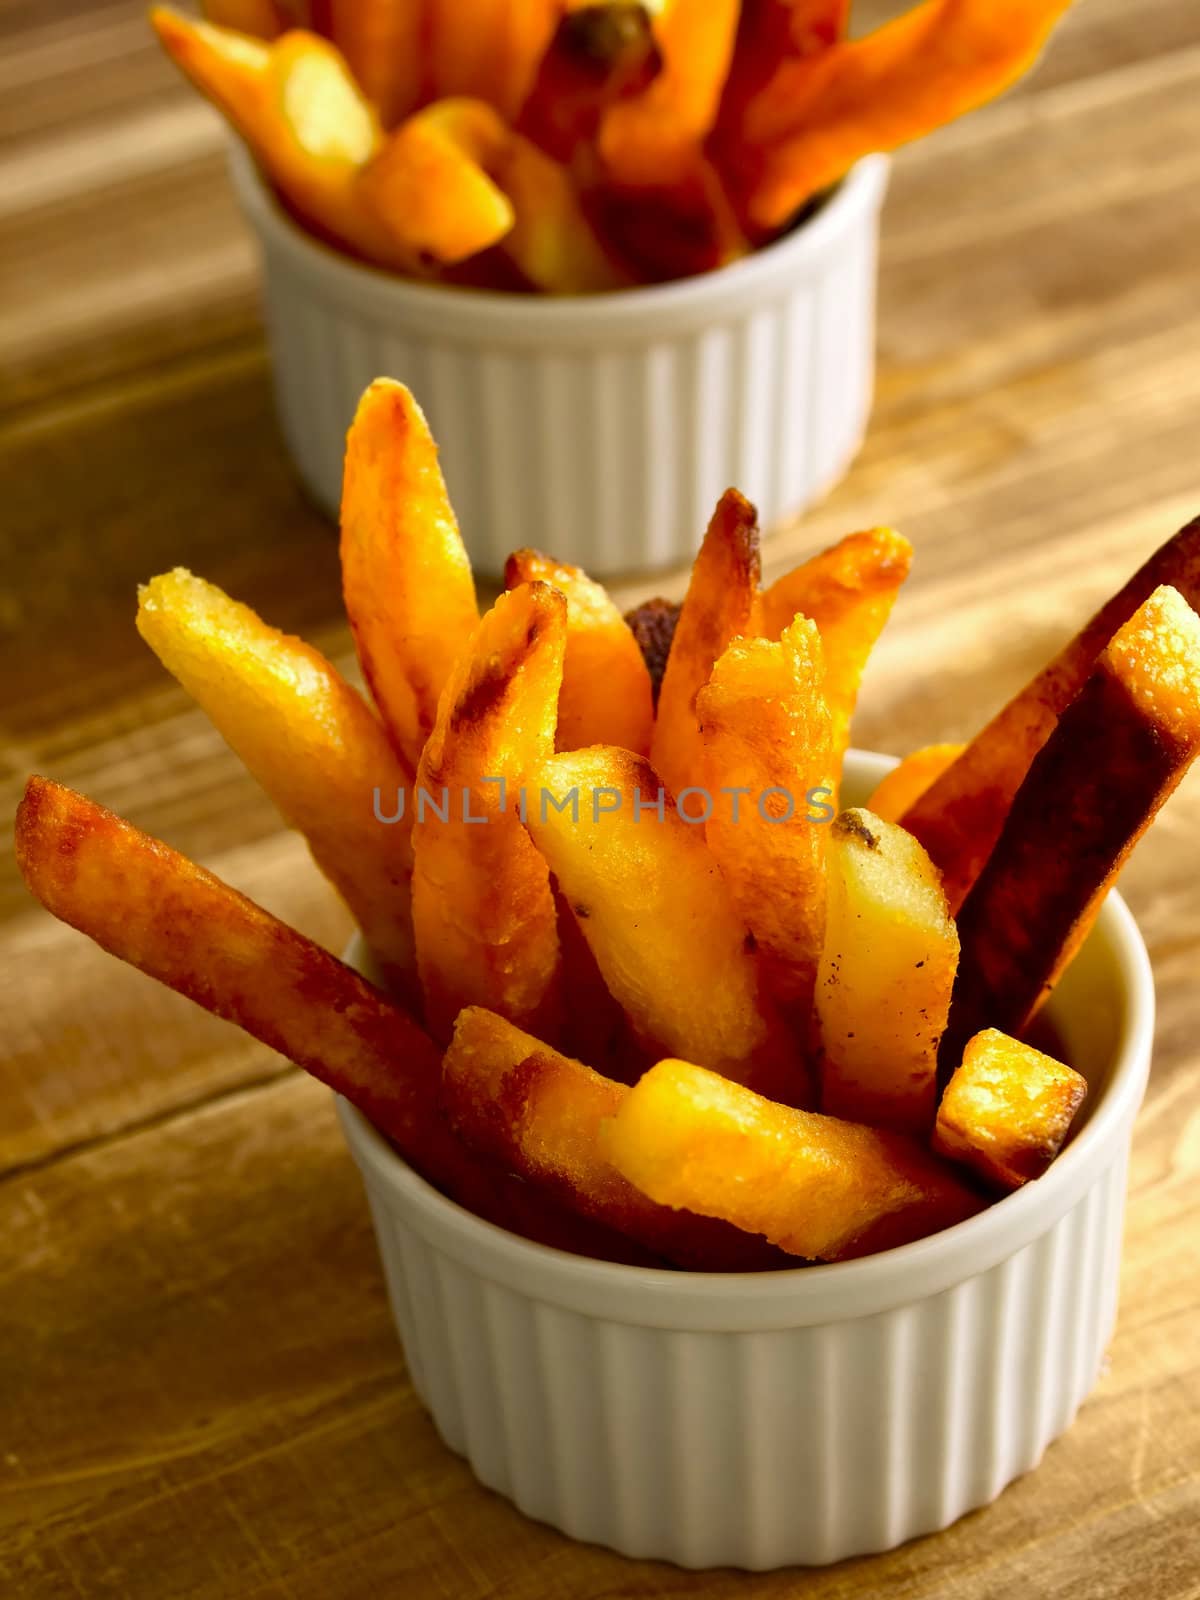 french fries by zkruger